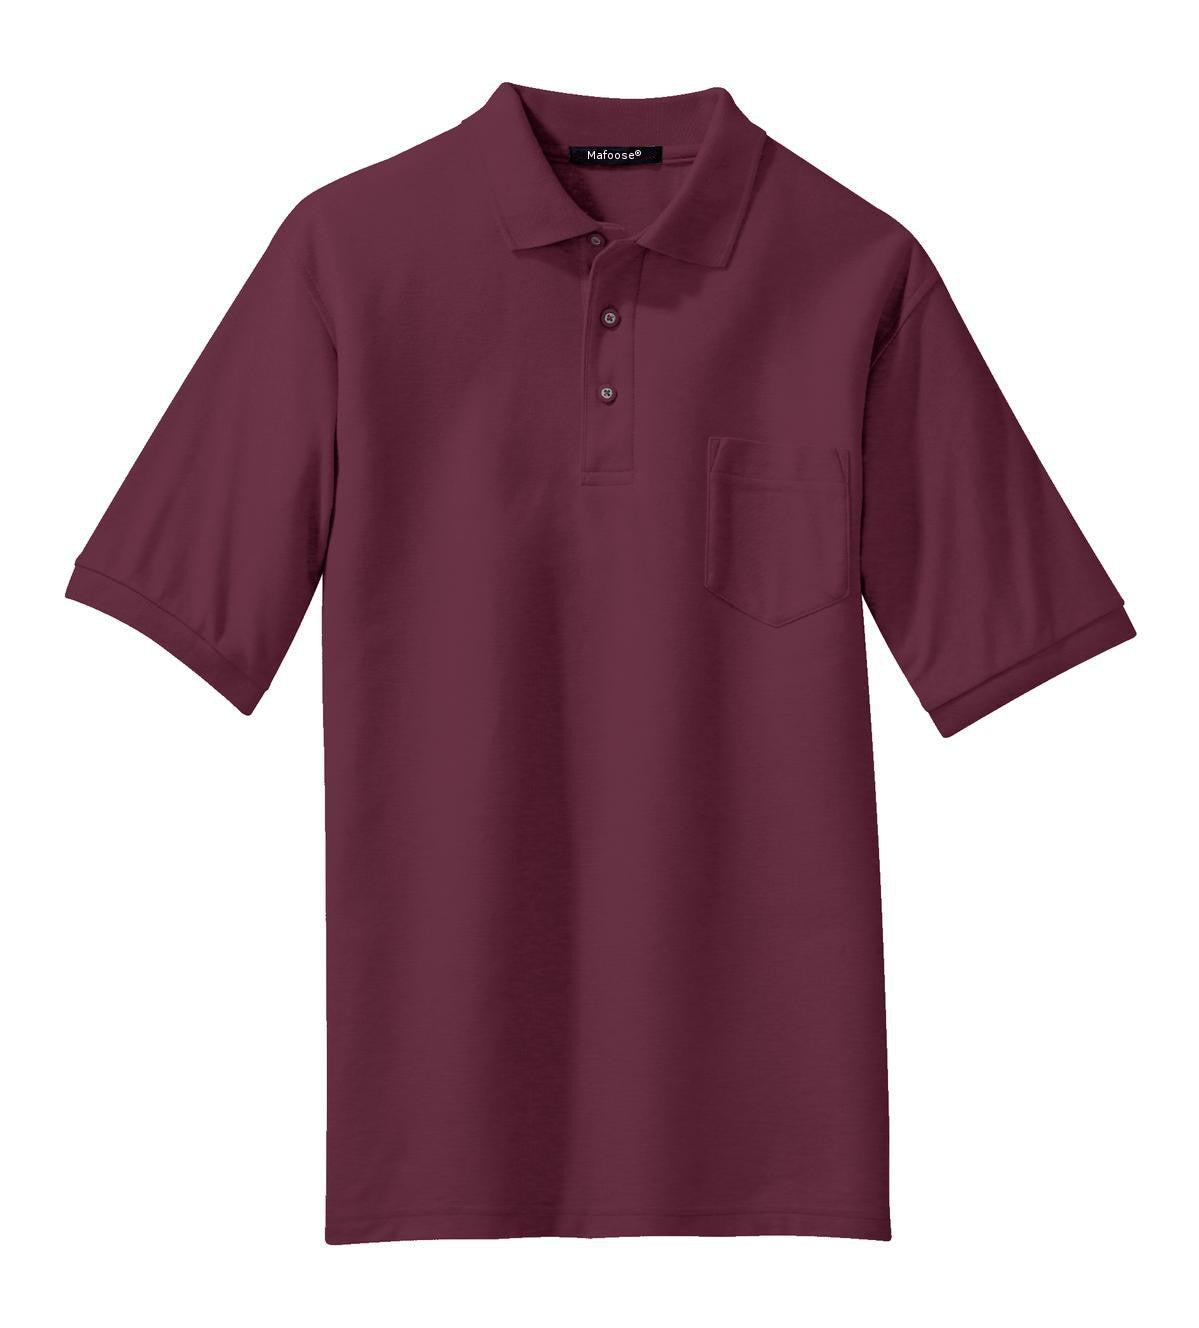 Mafoose Men's Silk Touch Polo with Pocket Burgundy-Front